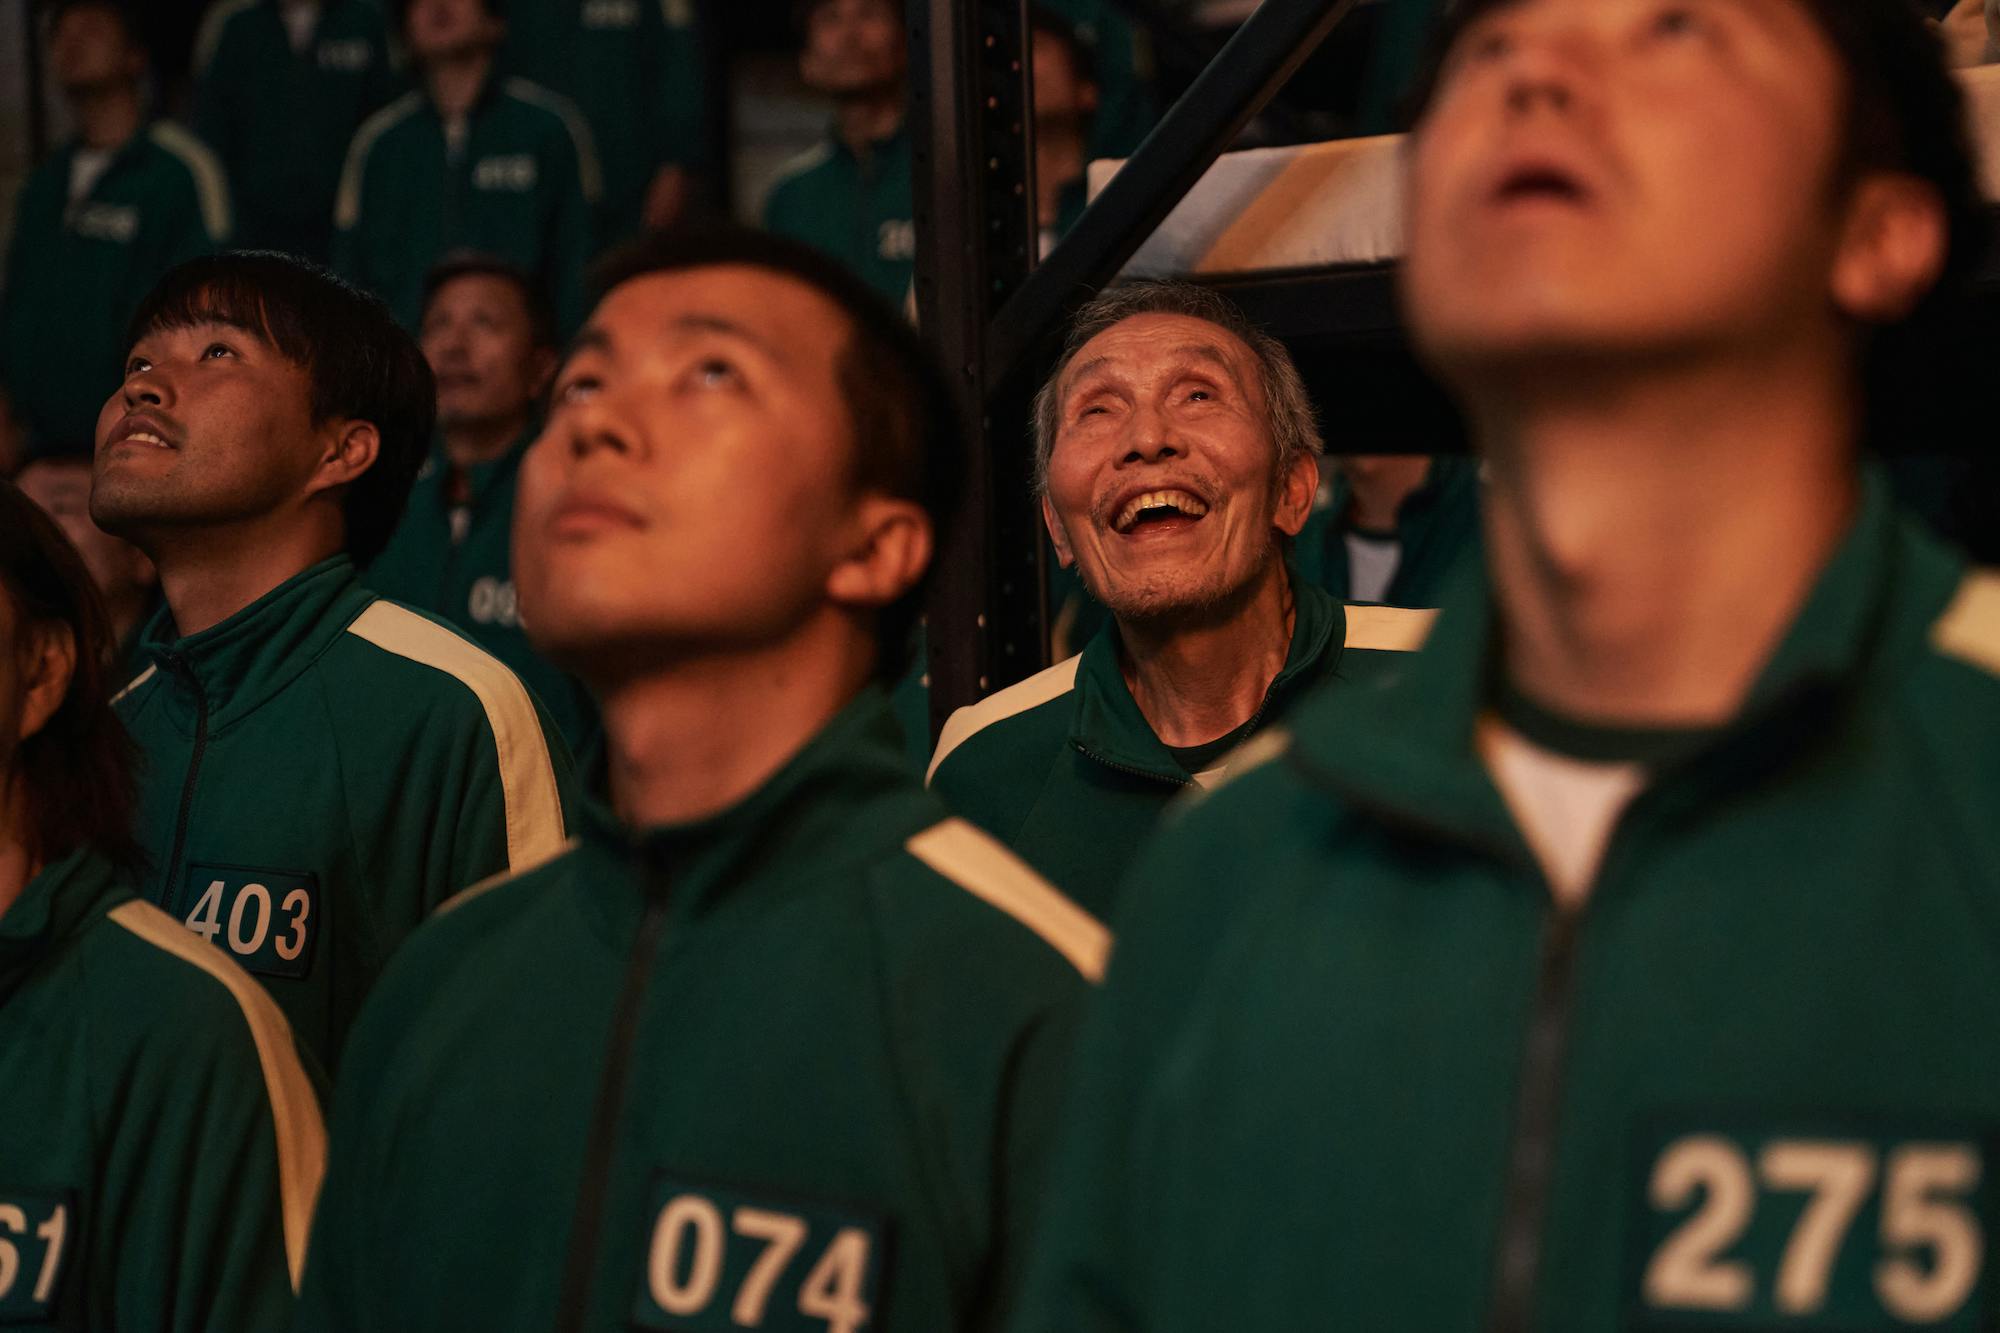 Oh Il-nam (Oh Young-soo) looks up in awe alongside other players in green tracksuits.